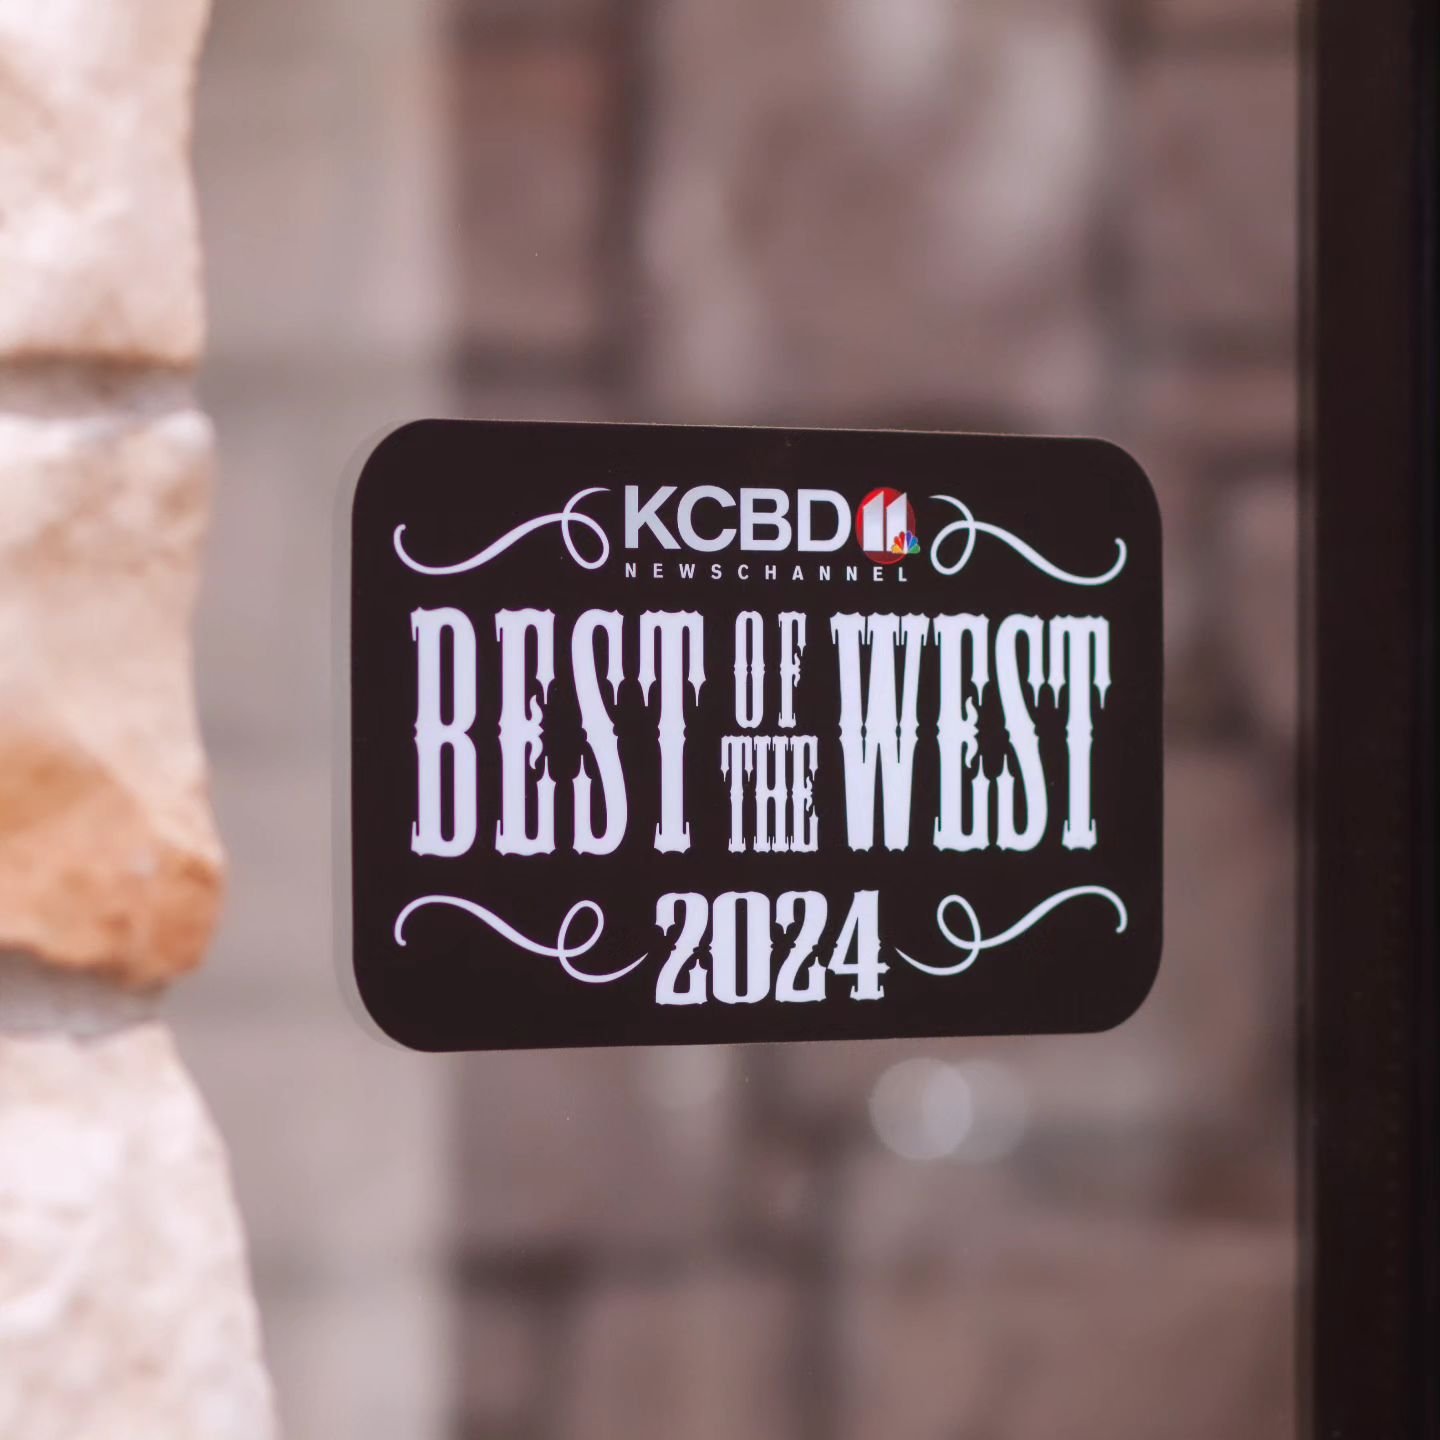 In case you missed it, Tailored Tails of Lubbock was voted Best of the West in the pet grooming category! We're so thankful to our loyal clients for helping us achieve this prestigious award.✨️ #bestofthewest2024 #bestdoggrooming #tailoredtailsoflubb